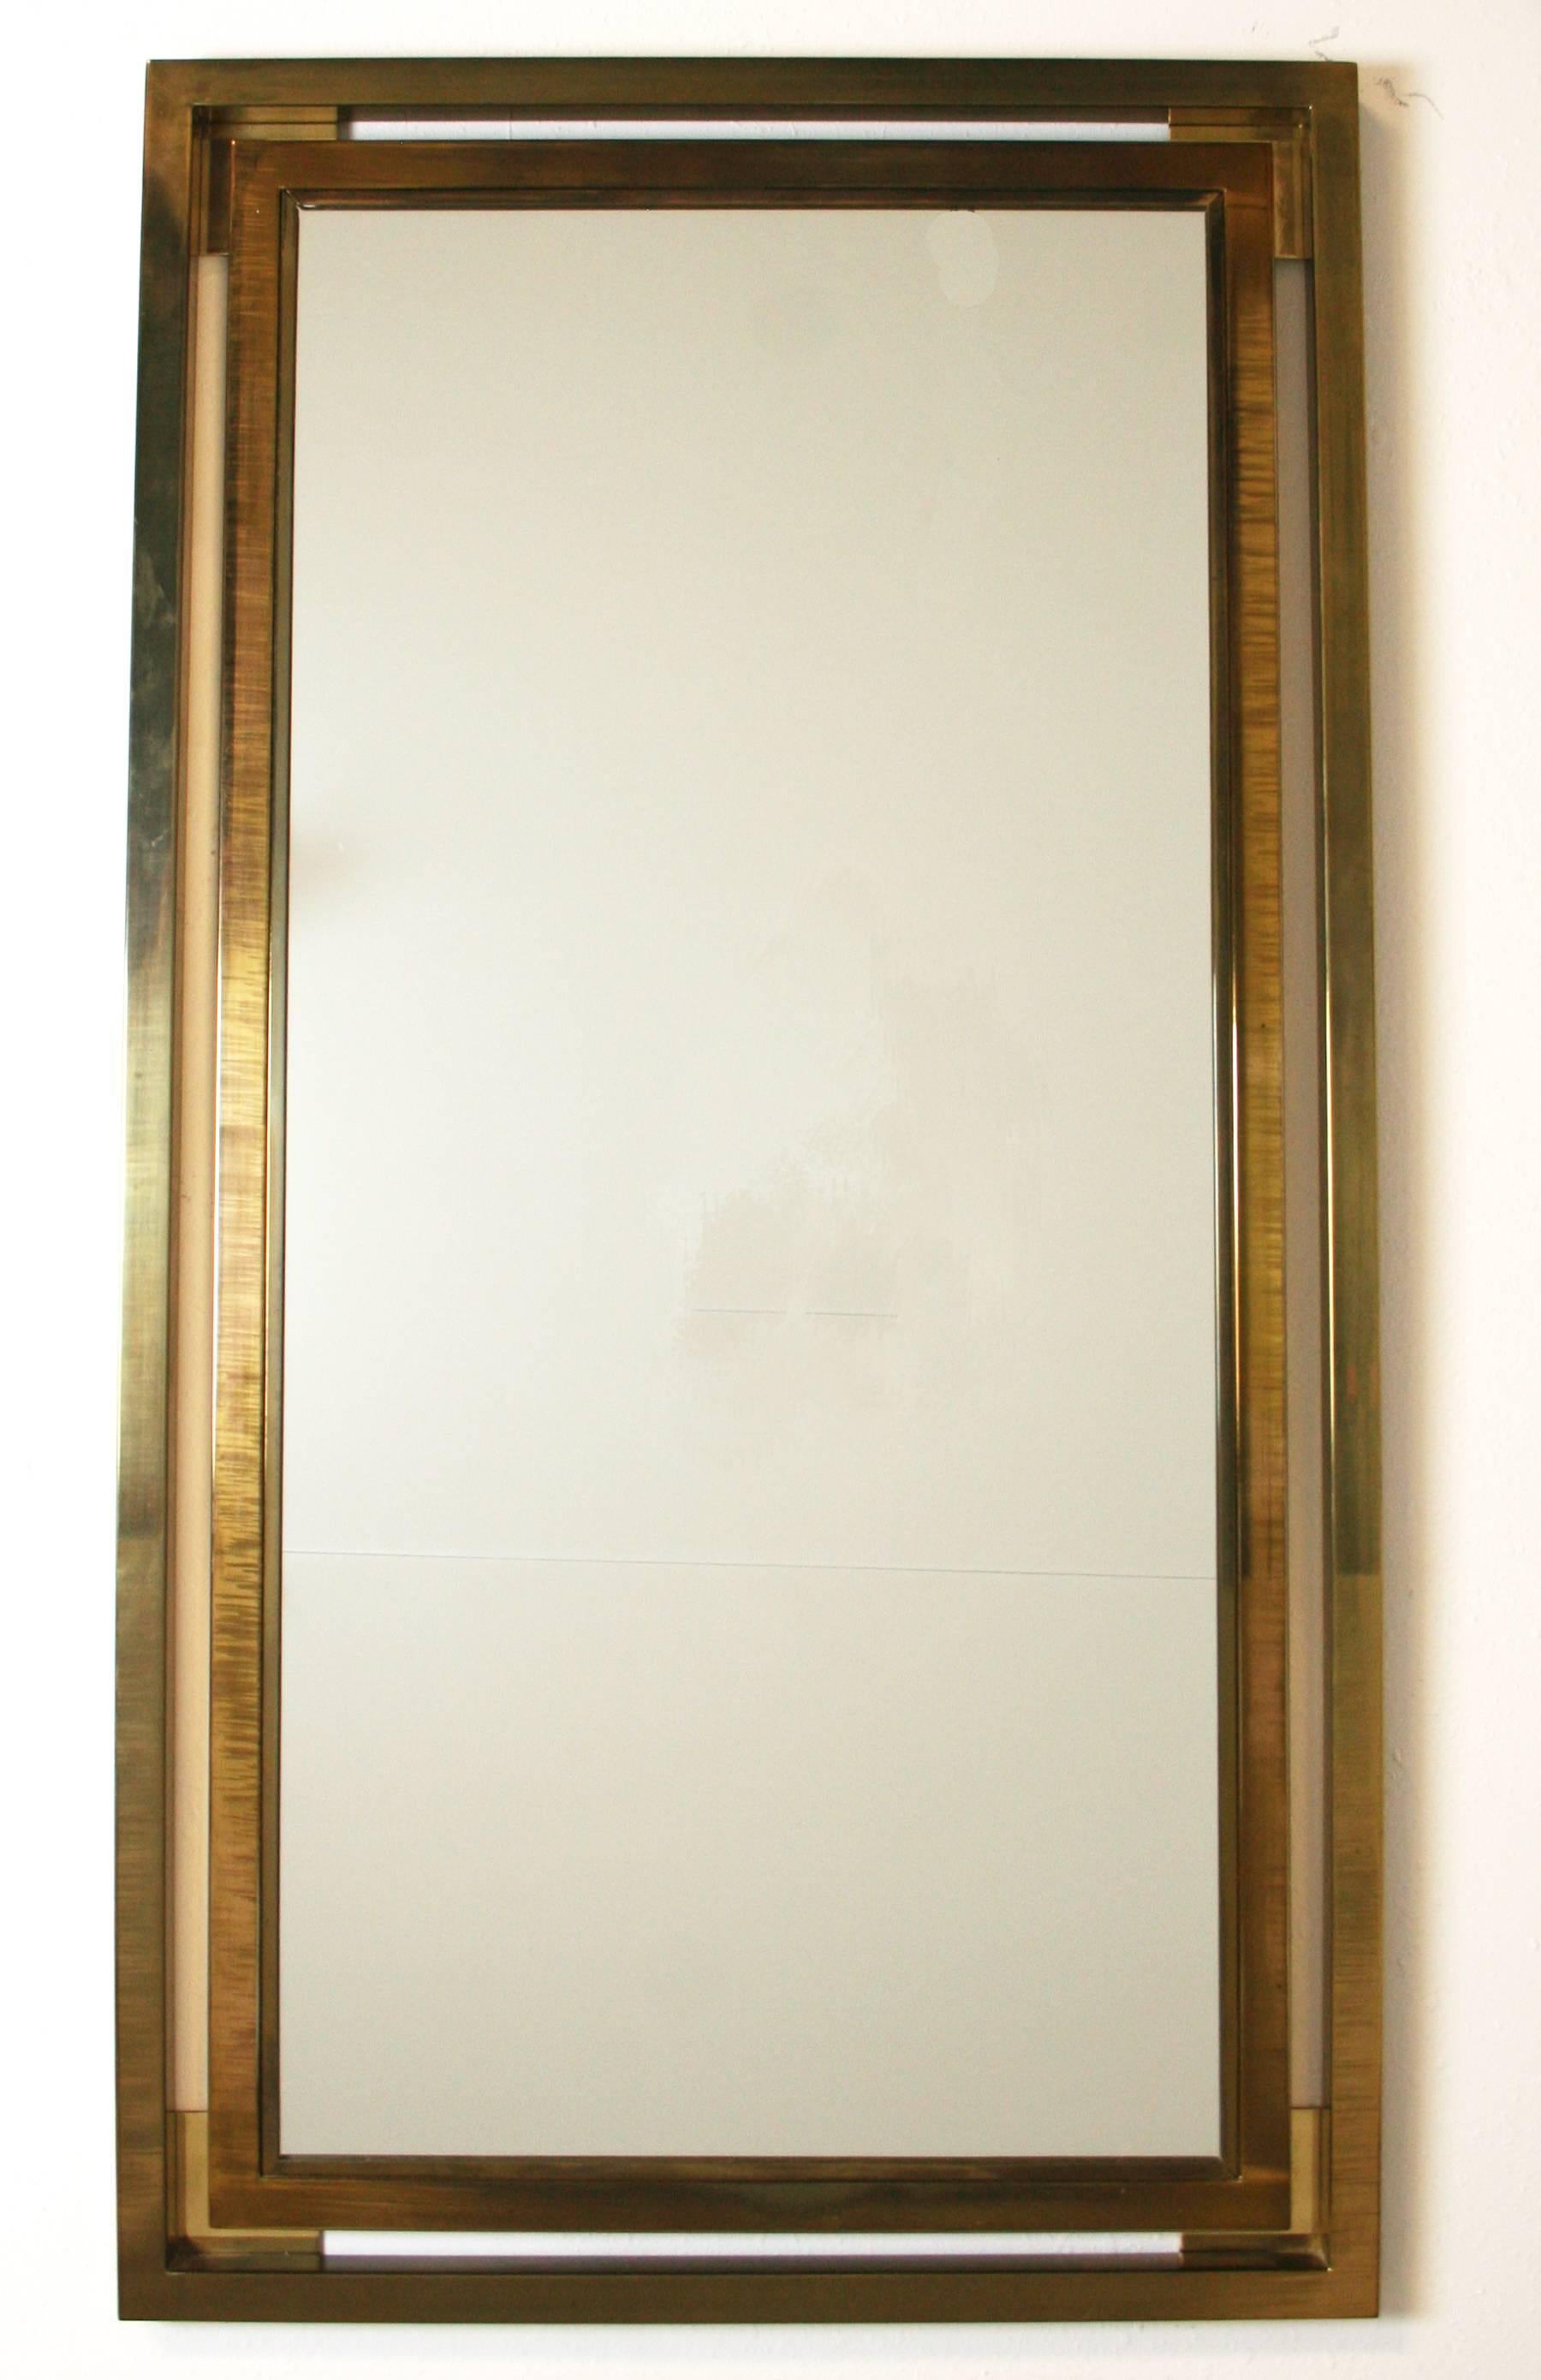 A 1970s Italian brass mirror, with two square section brass frames, one floating outside the other. in the style of Guy Lefevre or Wily Rizzo. Lovely patina to brass, but can be polished to a high shine. 